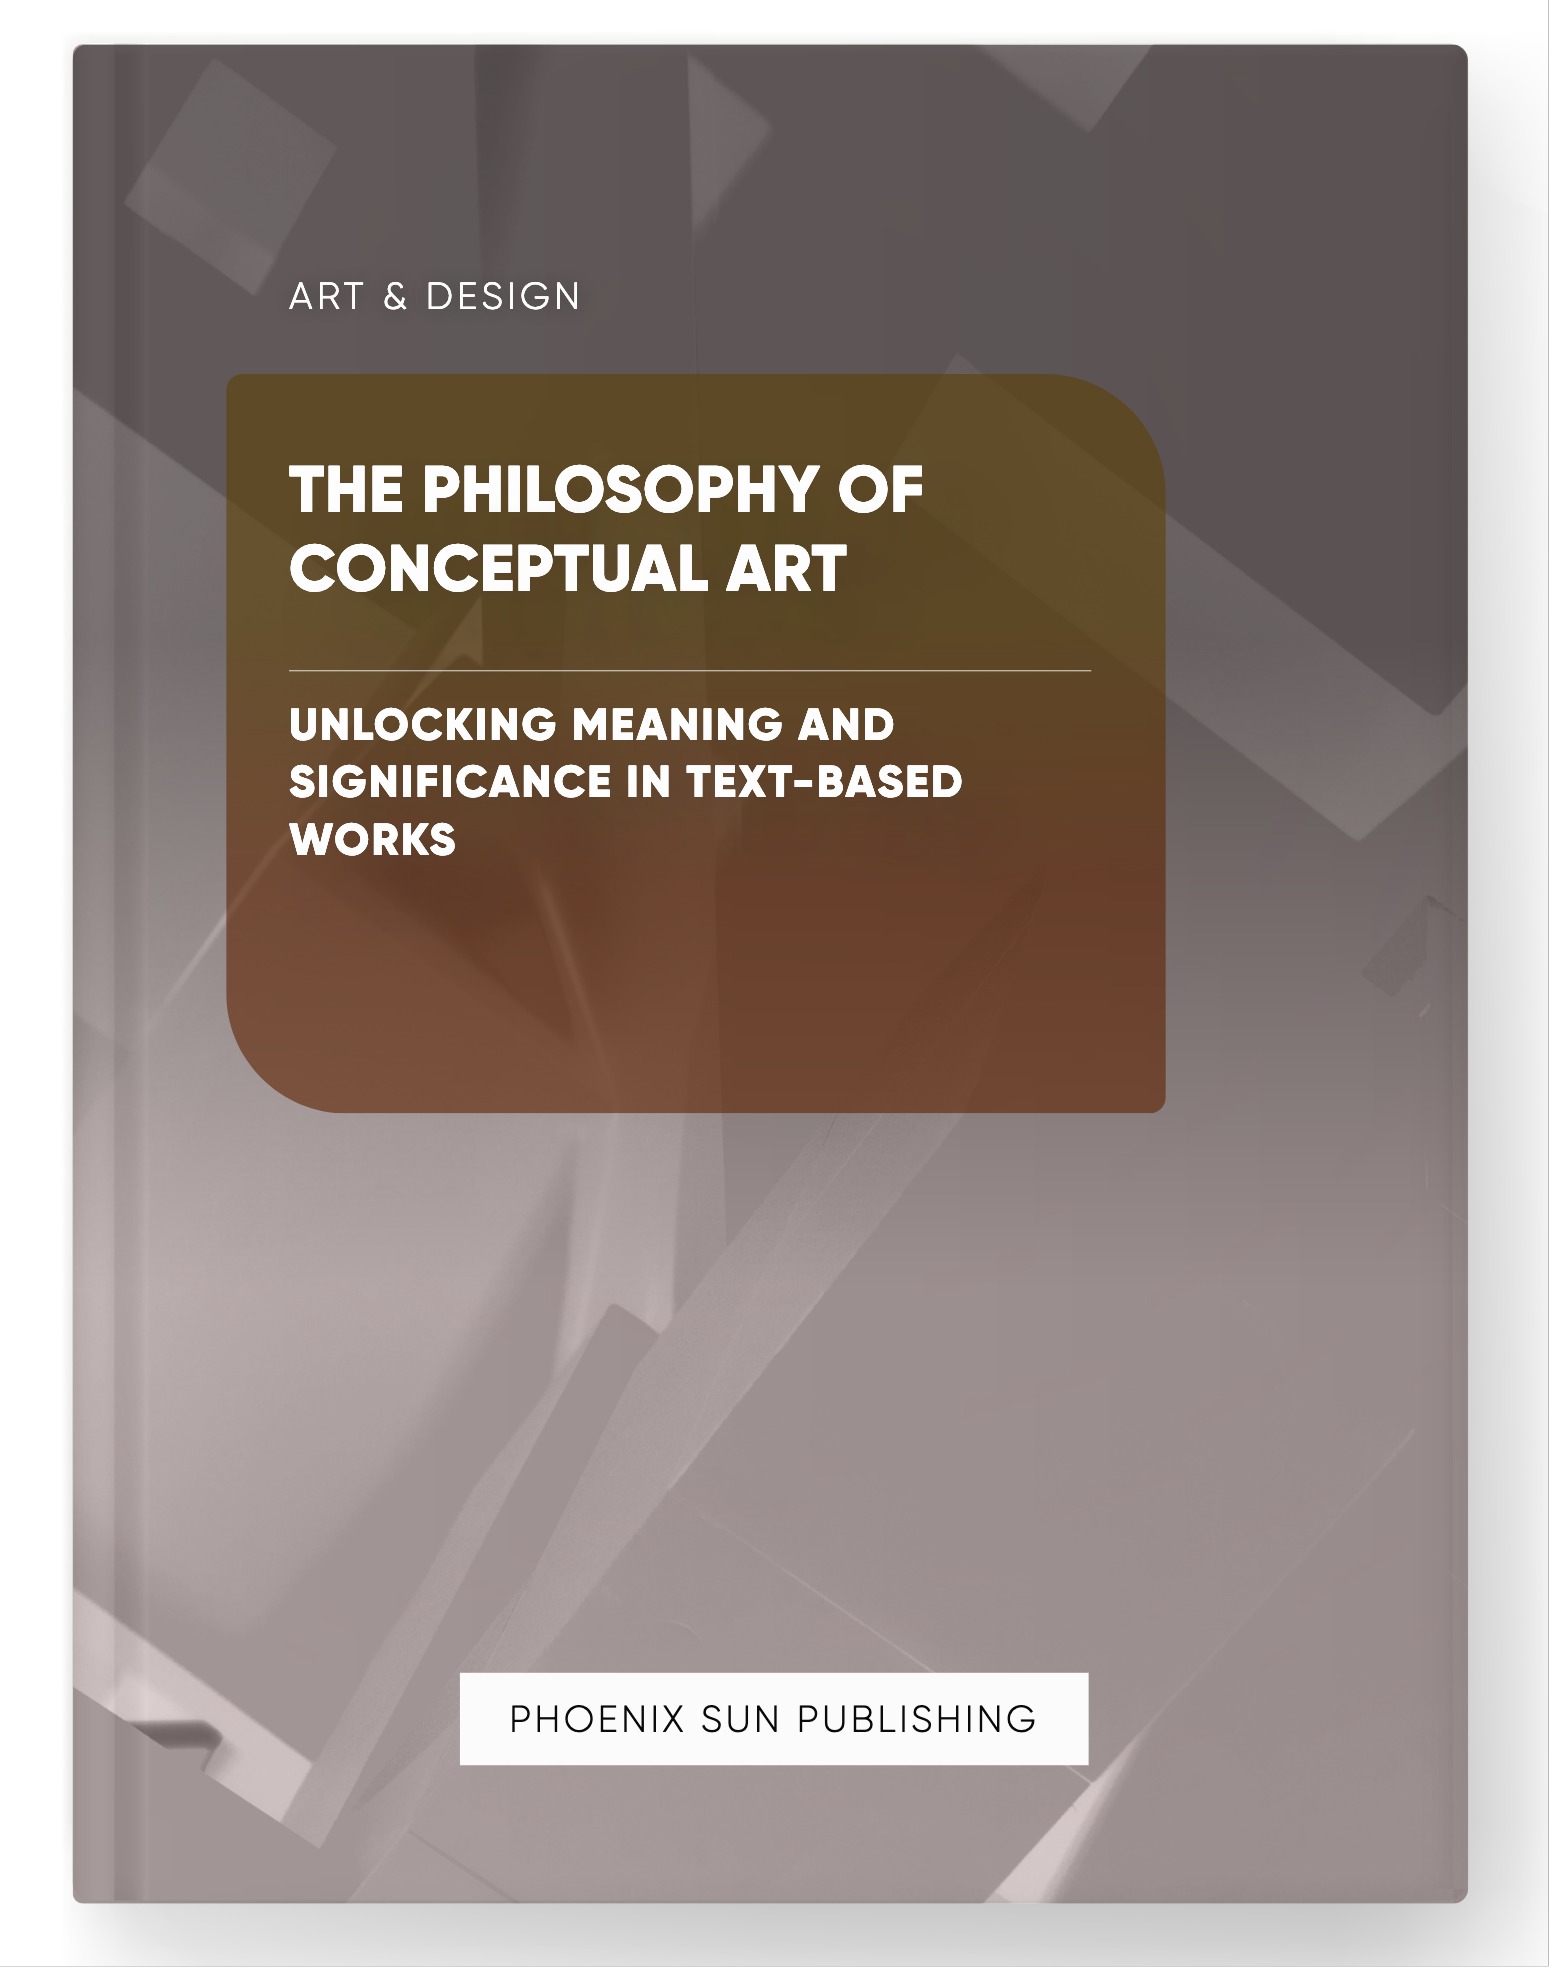 The Philosophy of Conceptual Art – Unlocking Meaning and Significance in Text-based Works